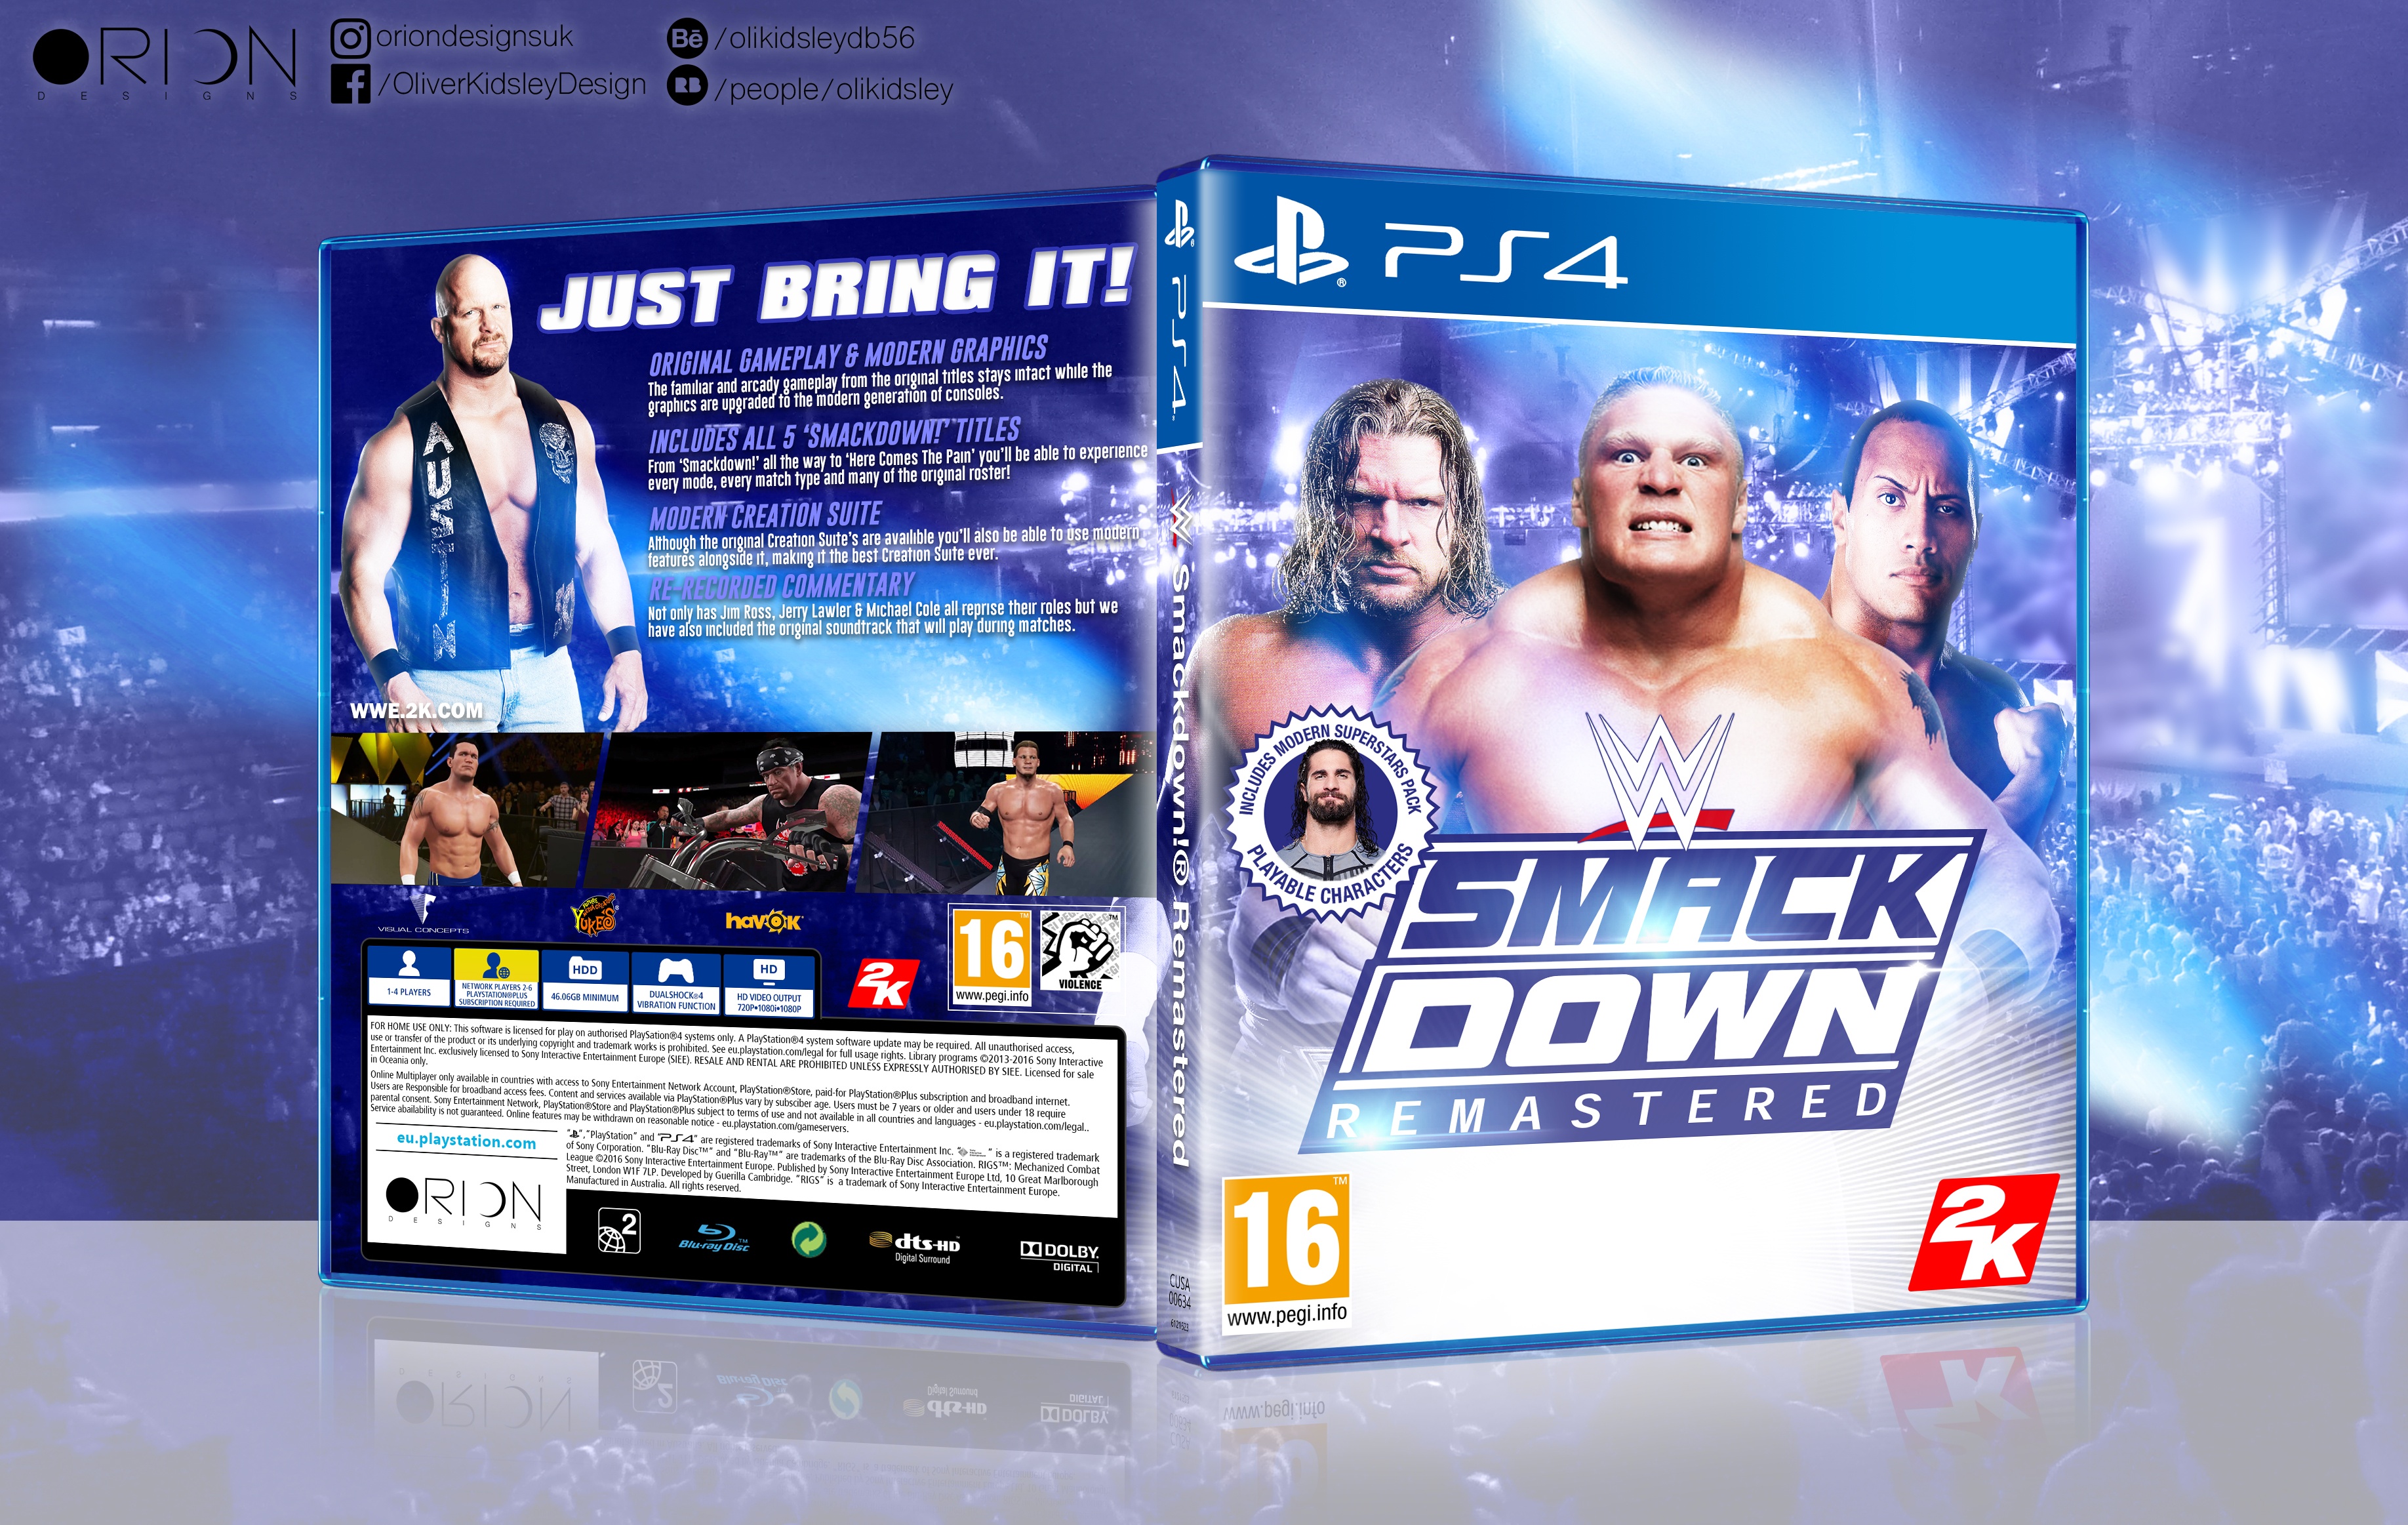 WWE Smackdown! Remastered box cover